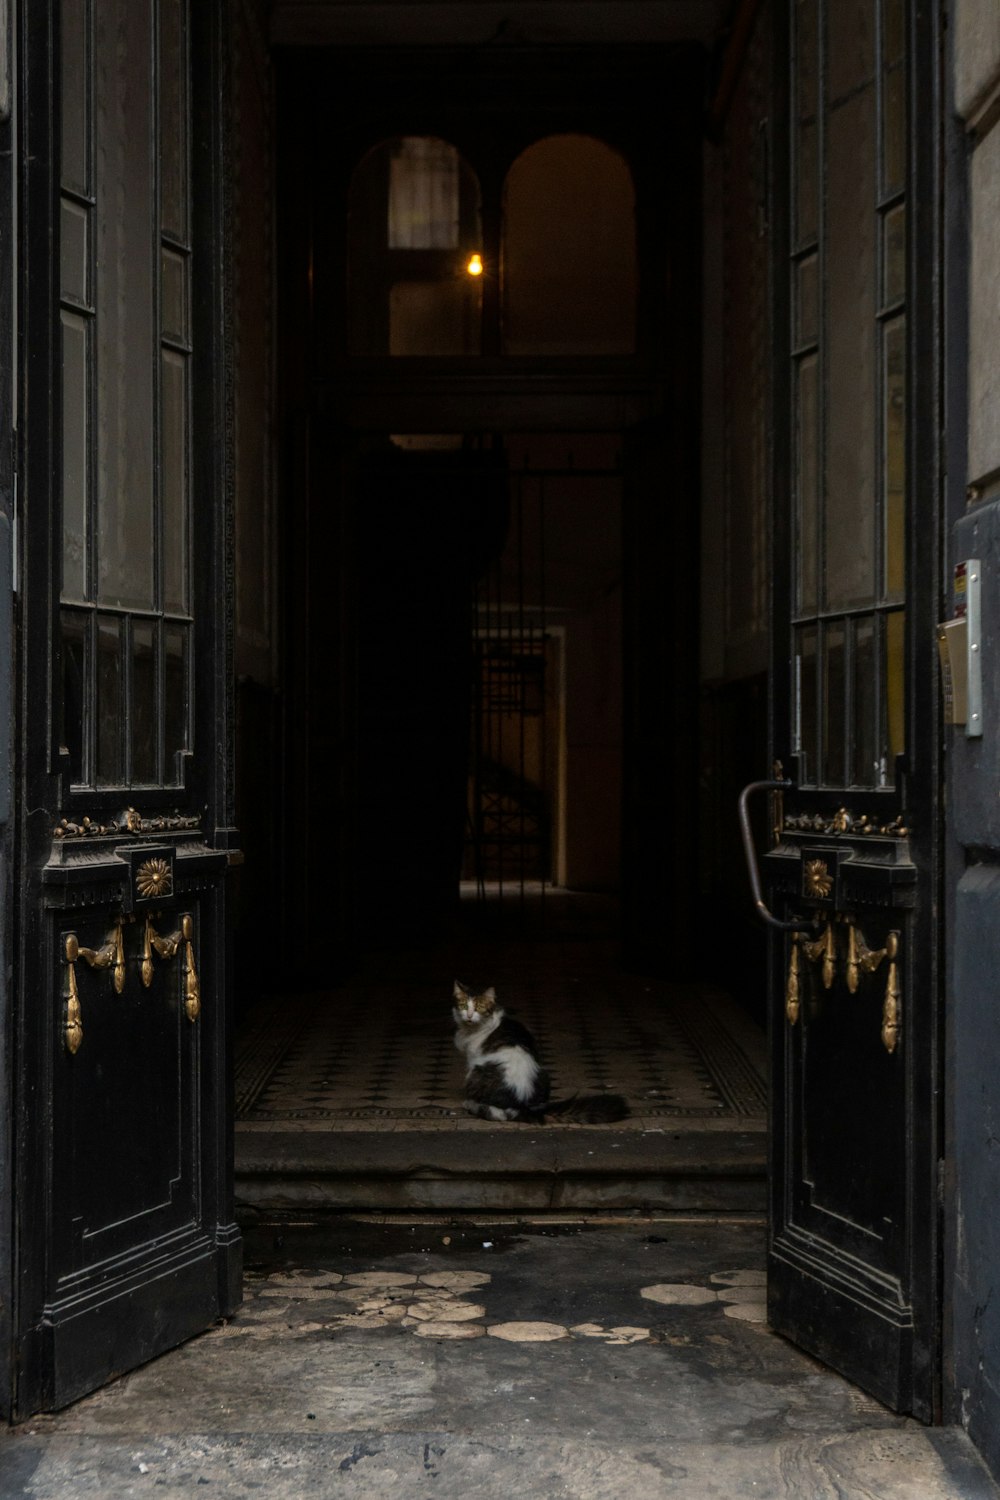 a cat sitting in the doorway of a building